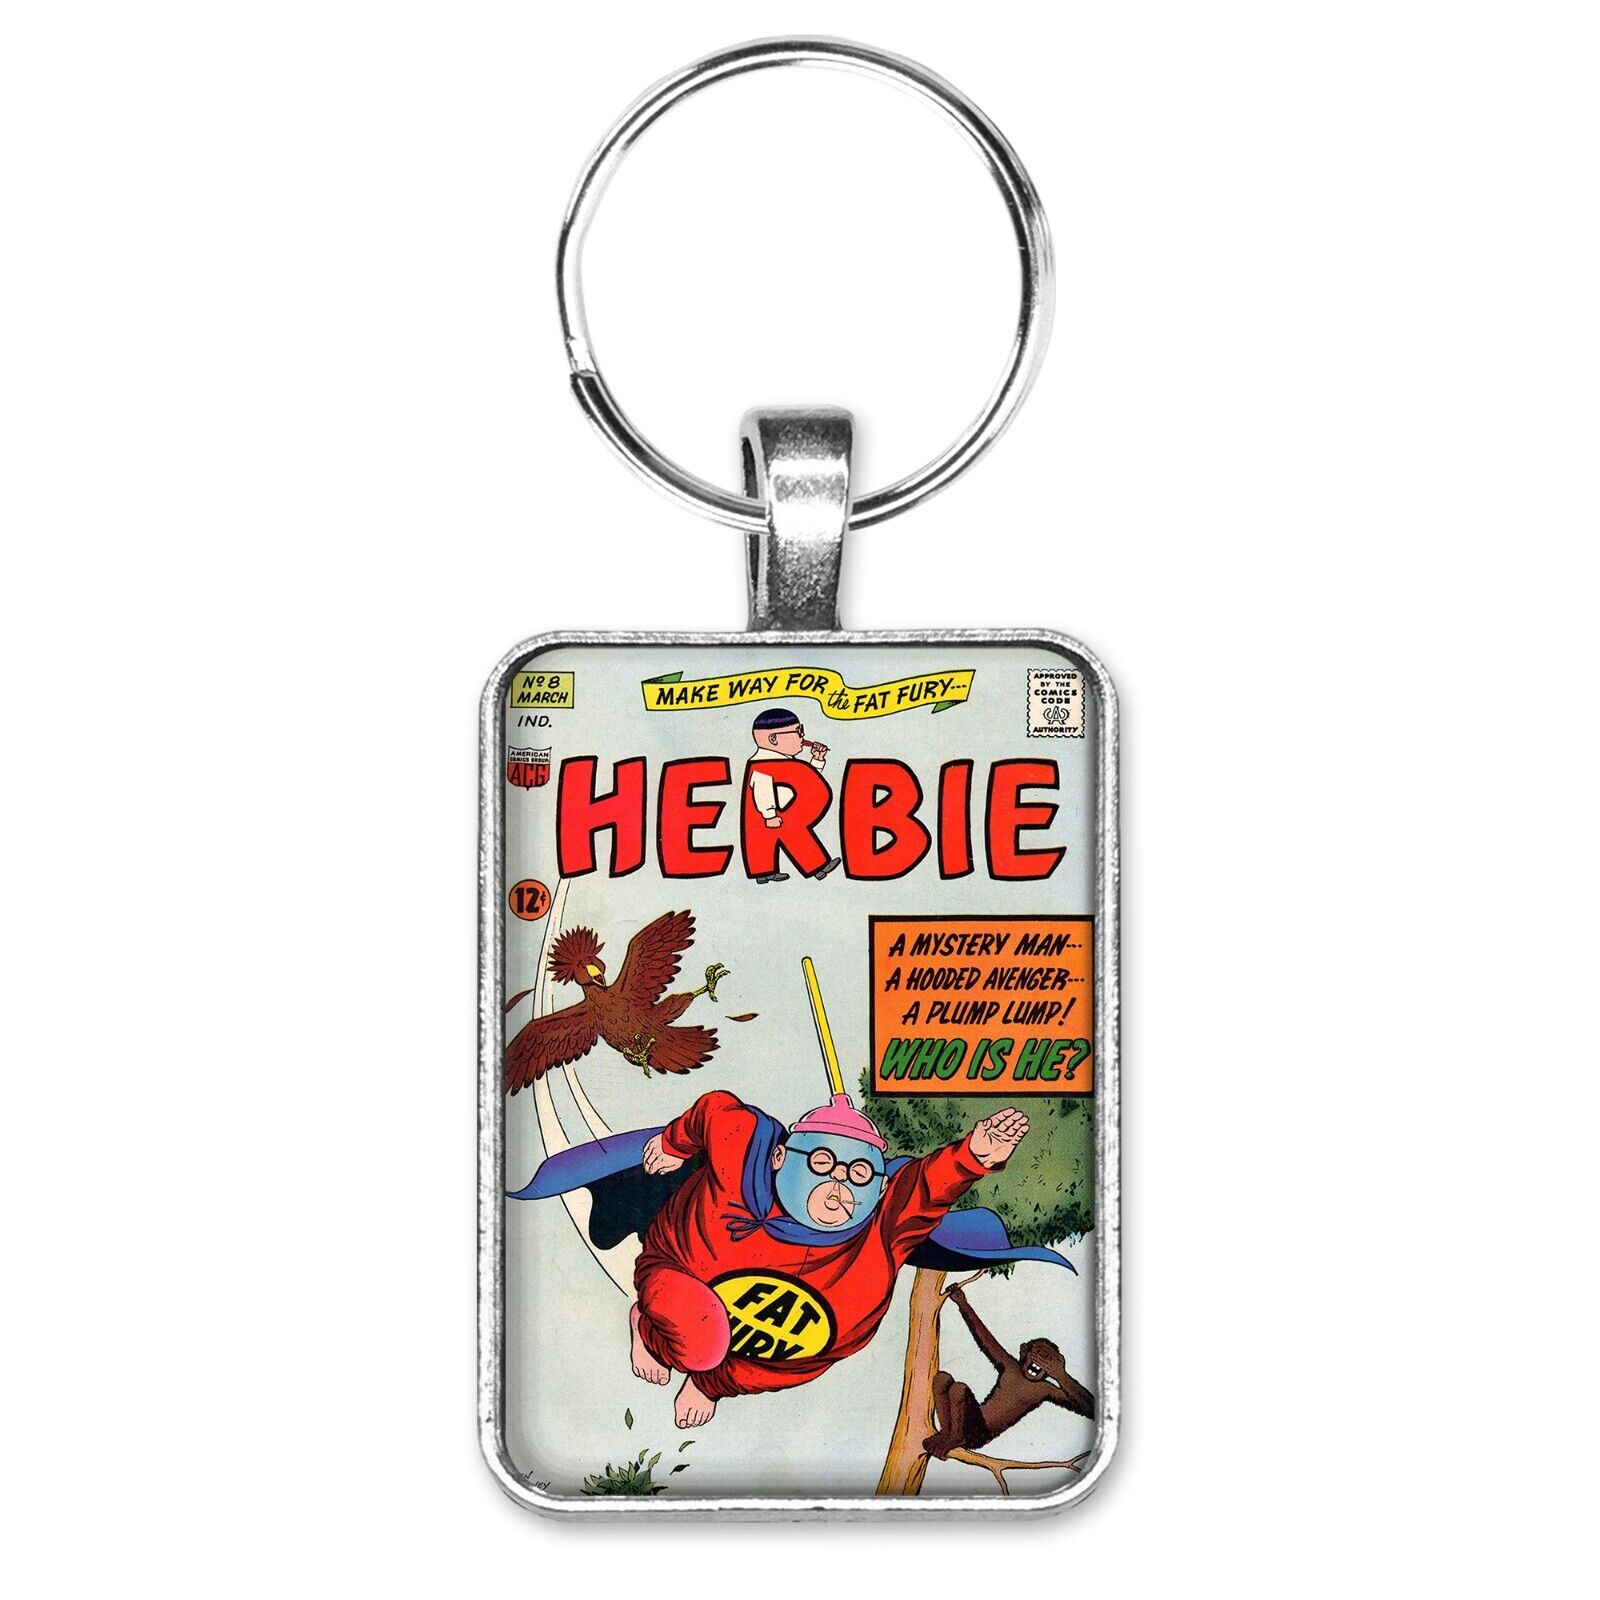 Herbie #8 Cover Key Ring or Necklace The Fat Fury Humor? Comic Book Jewelry